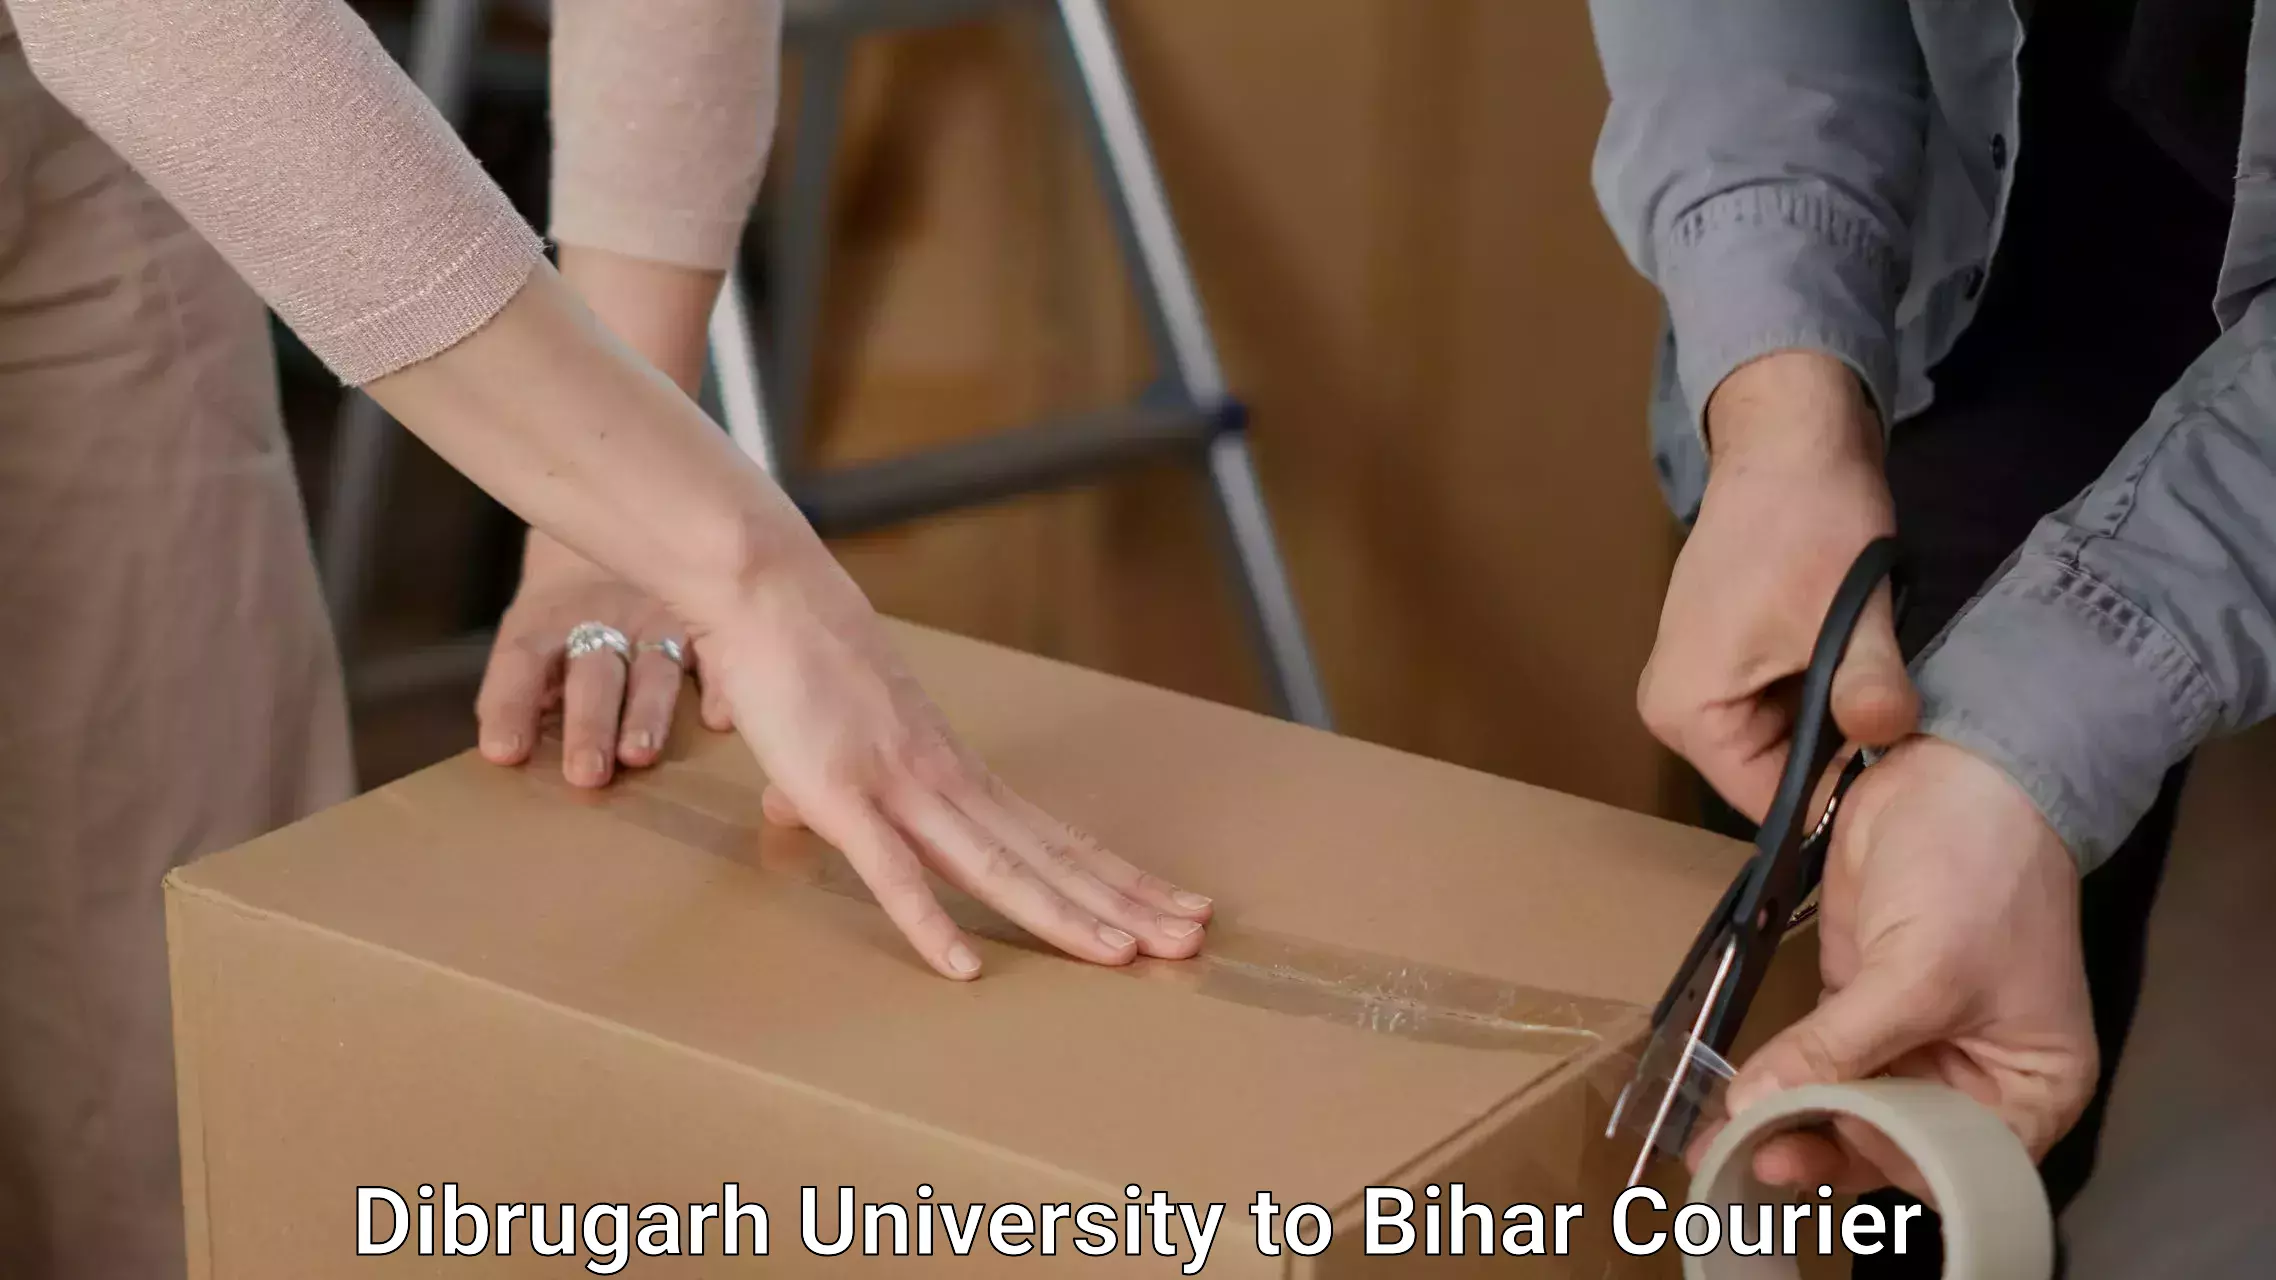 Trusted moving company Dibrugarh University to Dhaka